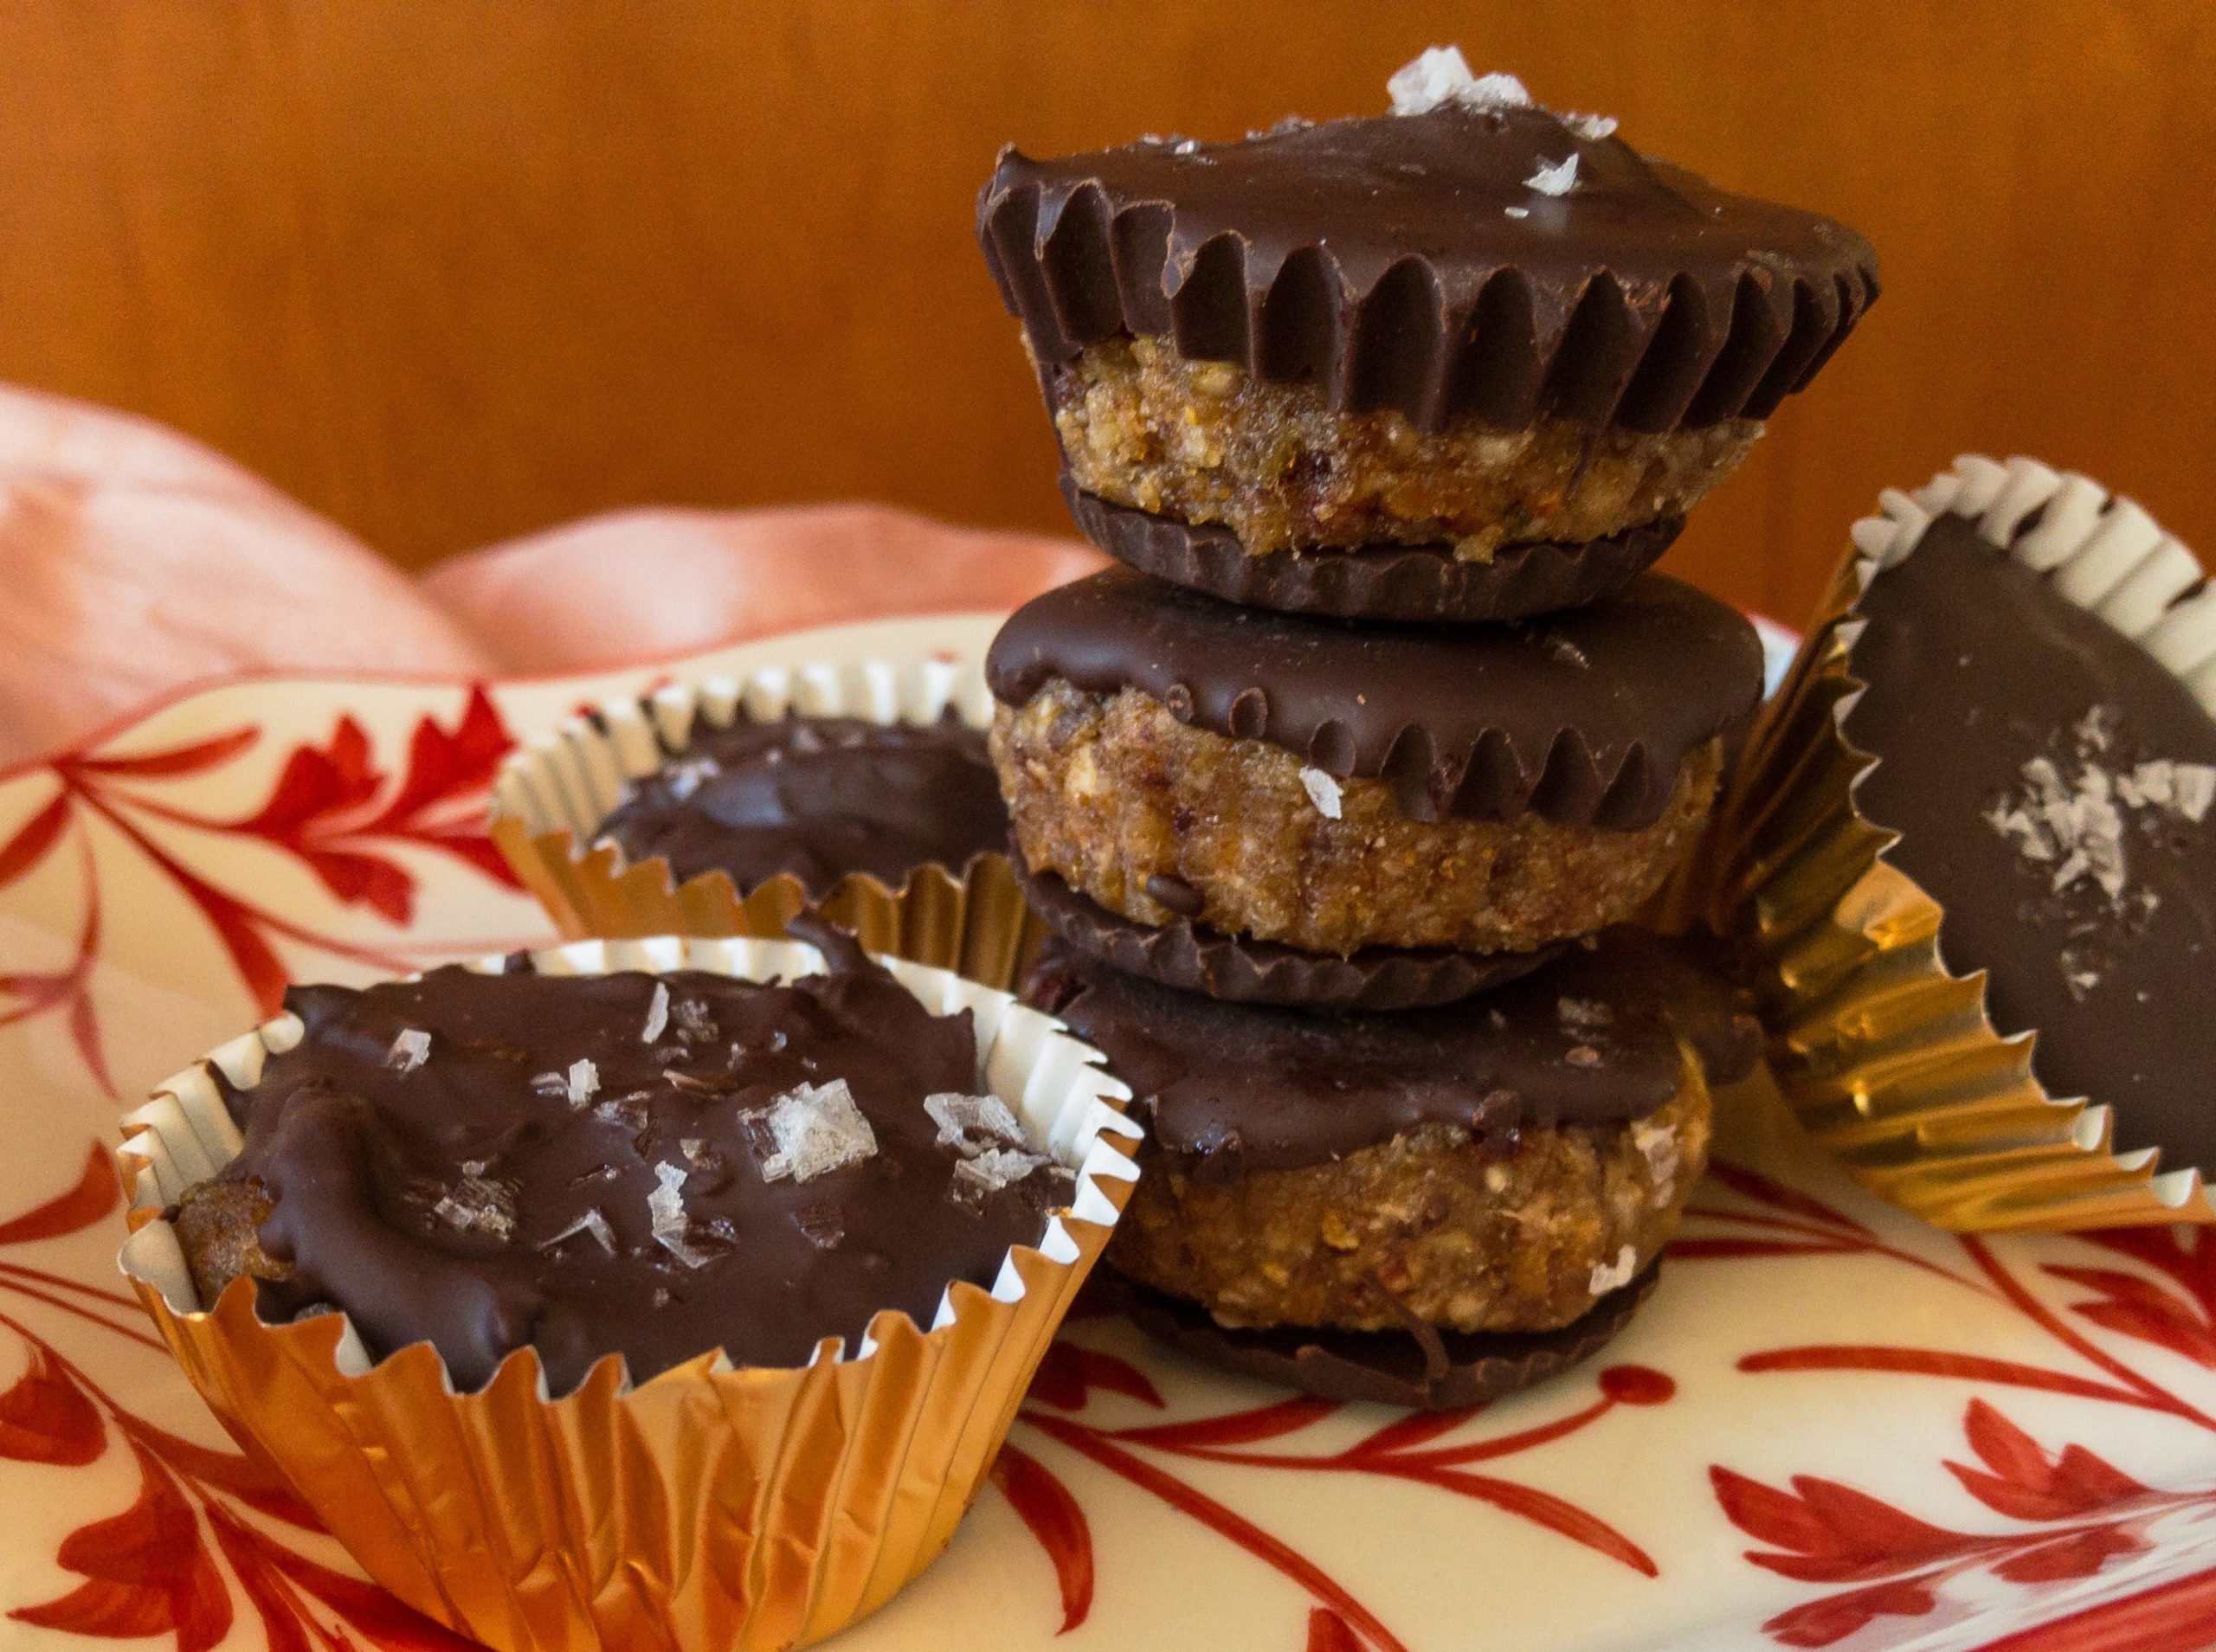 salted chocolate nut cups with chocolate